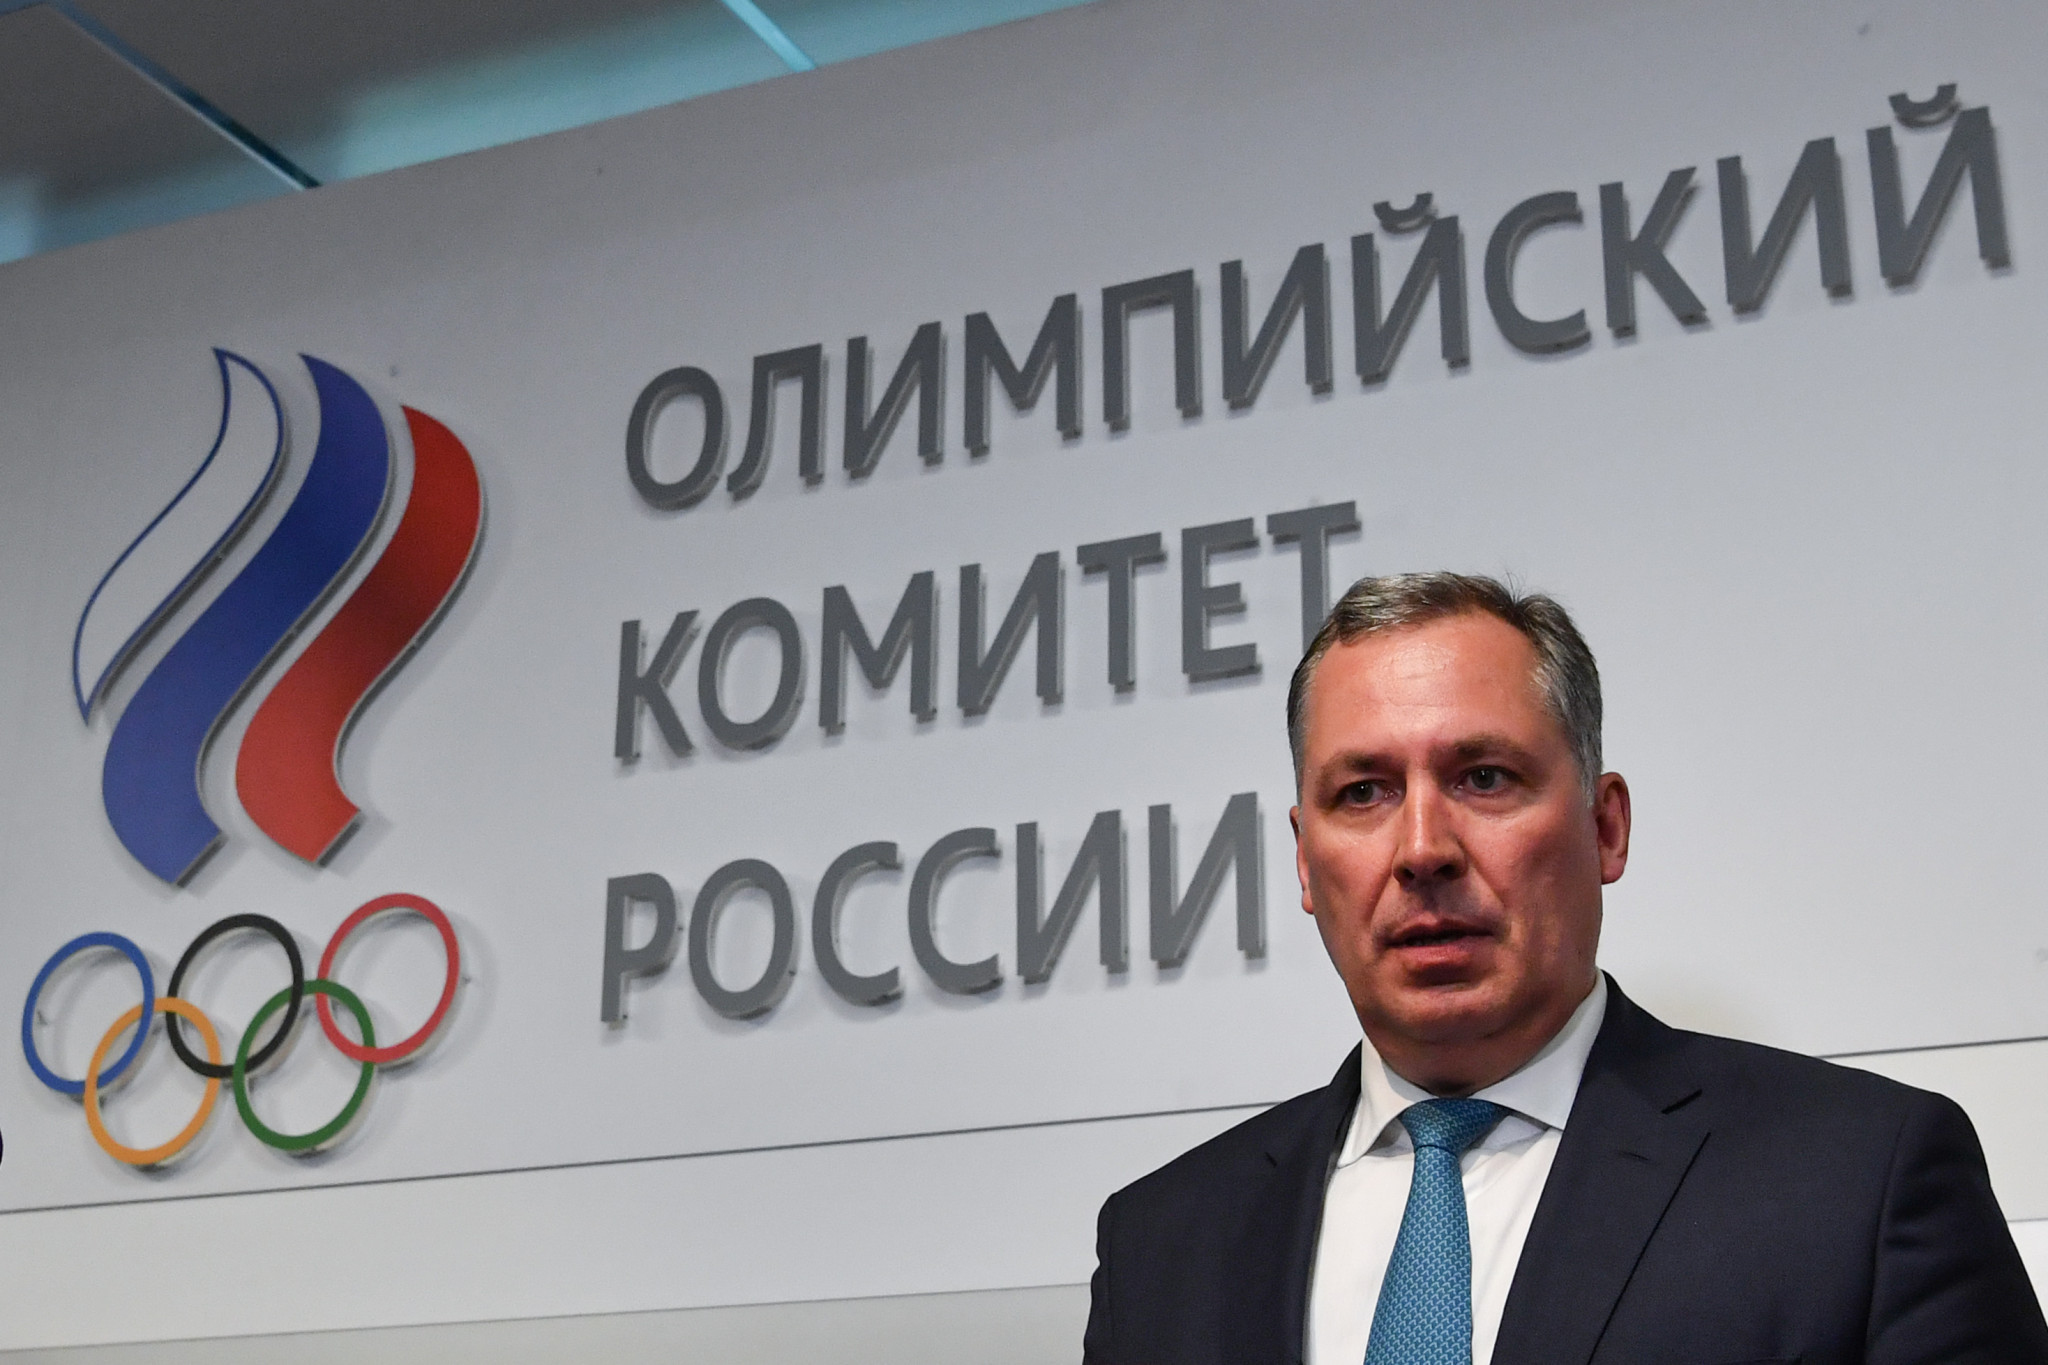 Russian Olympic Committee President becomes ex-officio member of ANOC Executive Council